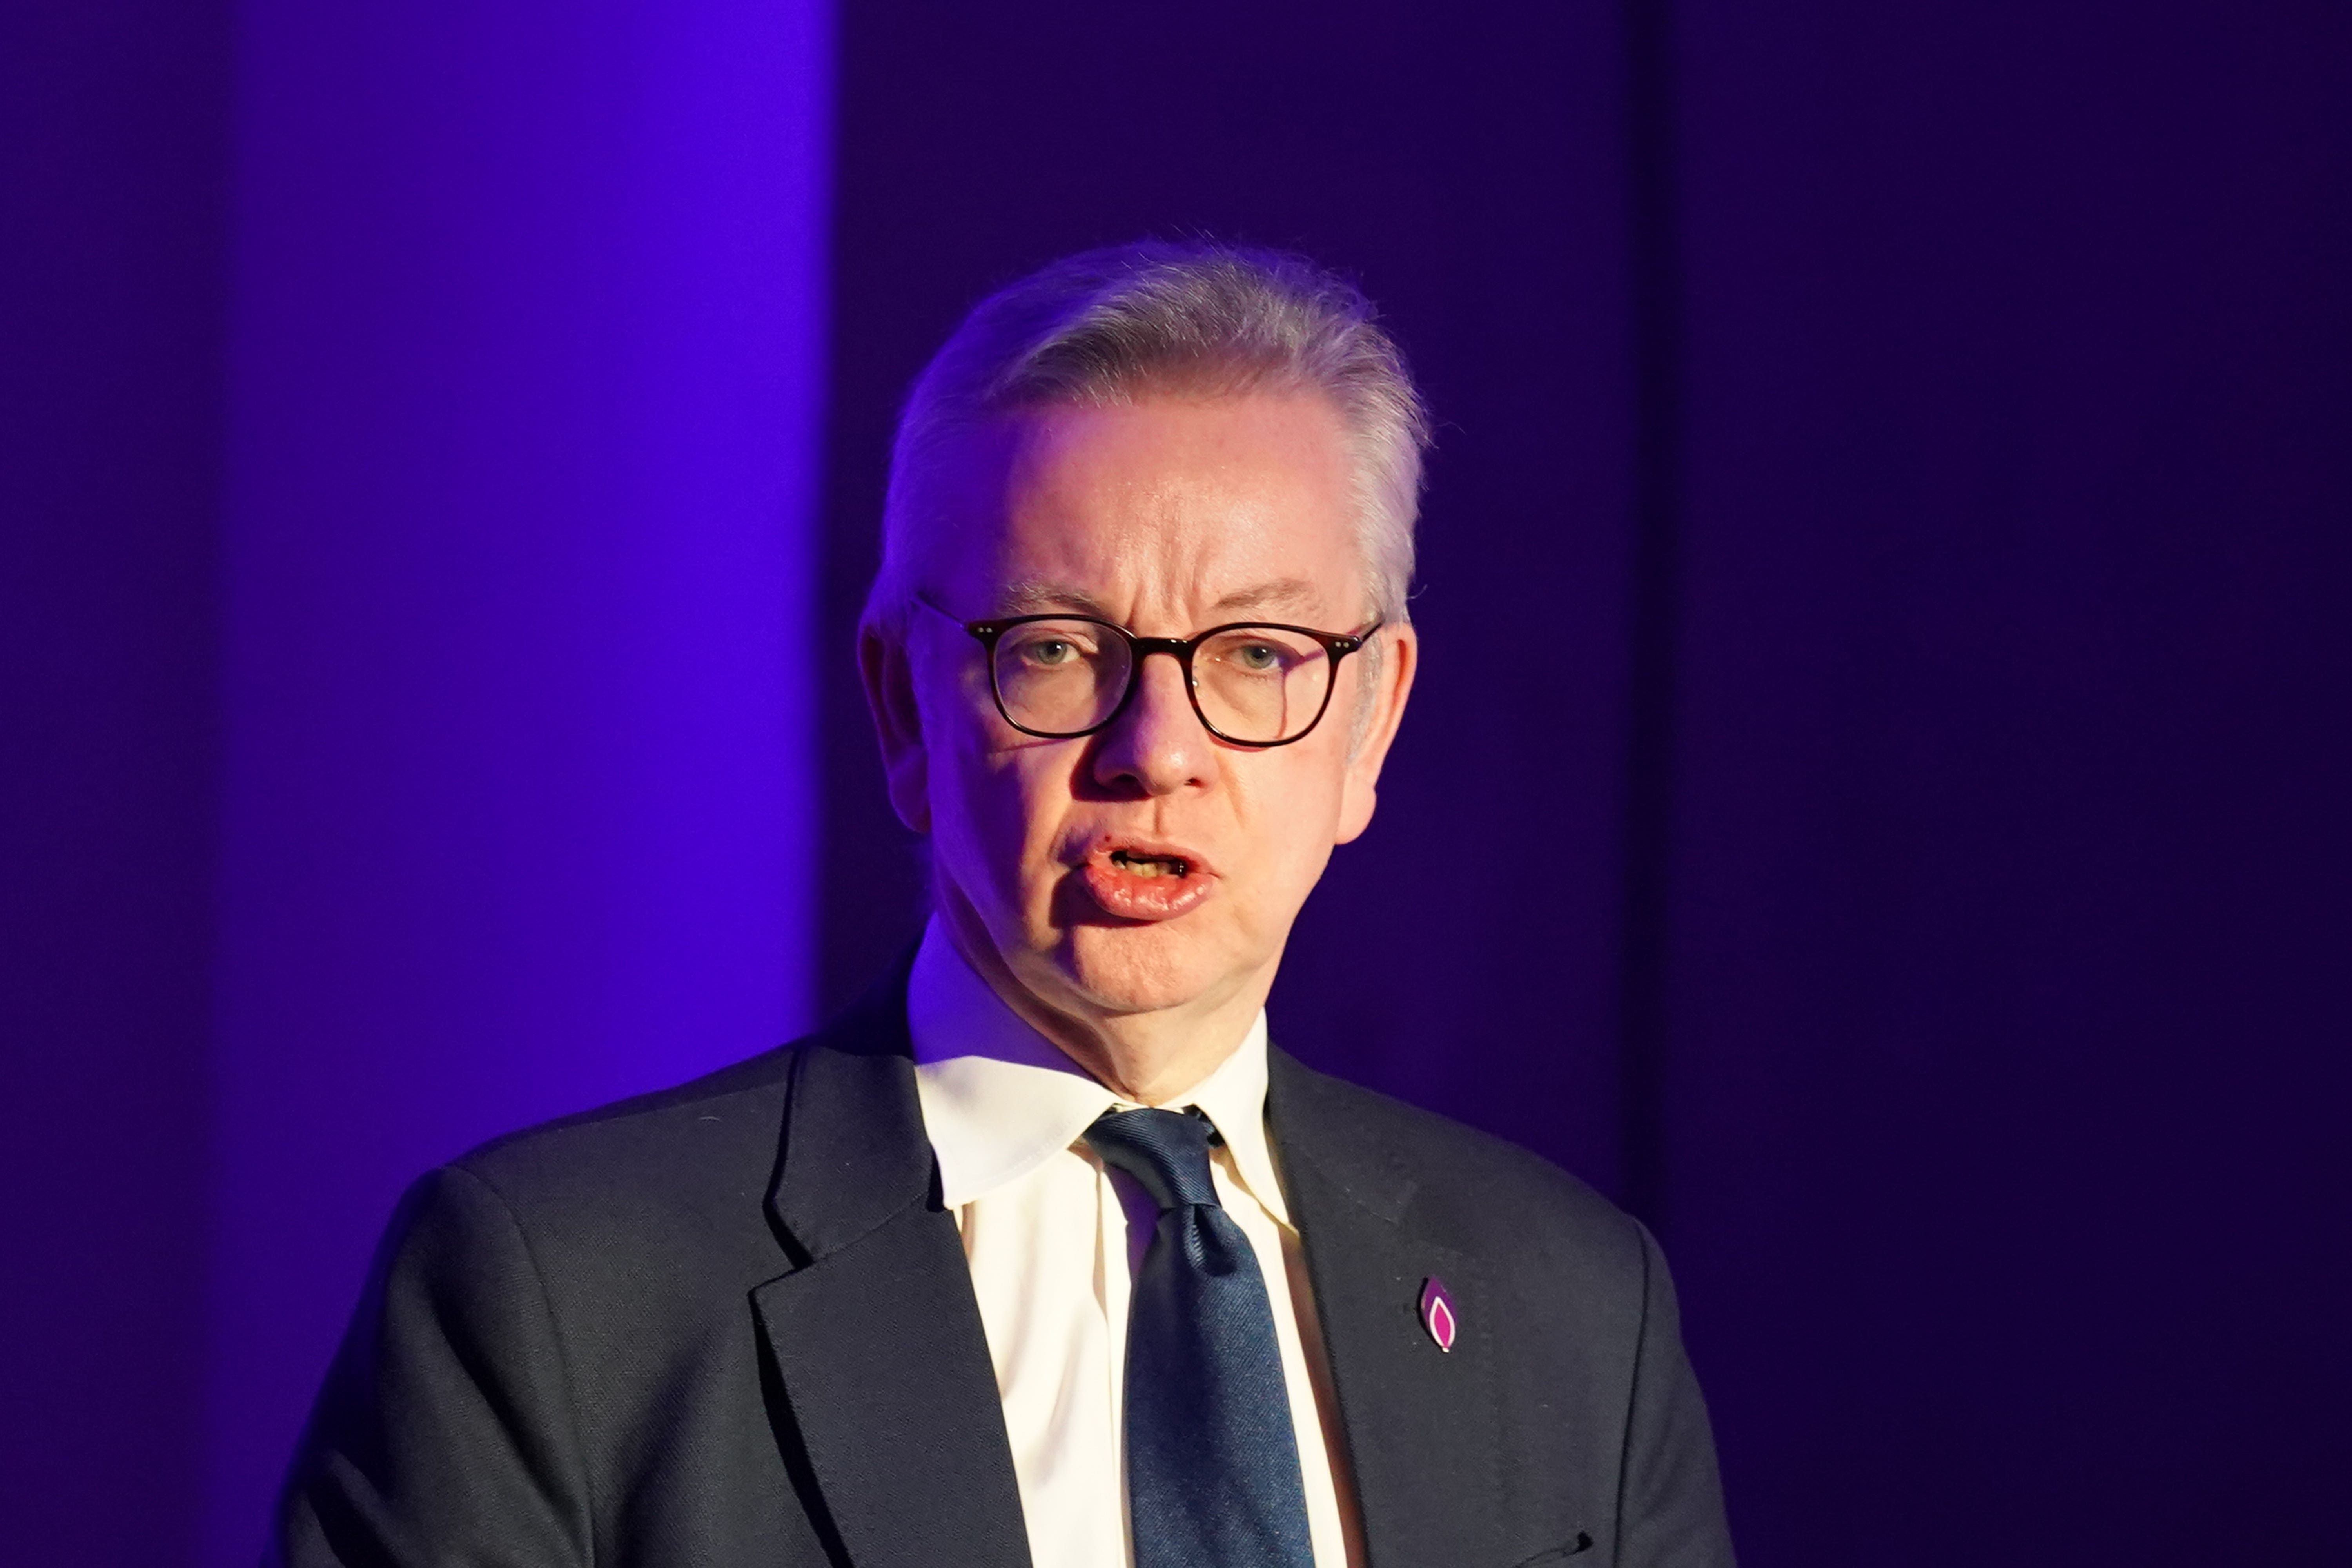 Michael Gove has admitted using cocaine in the past